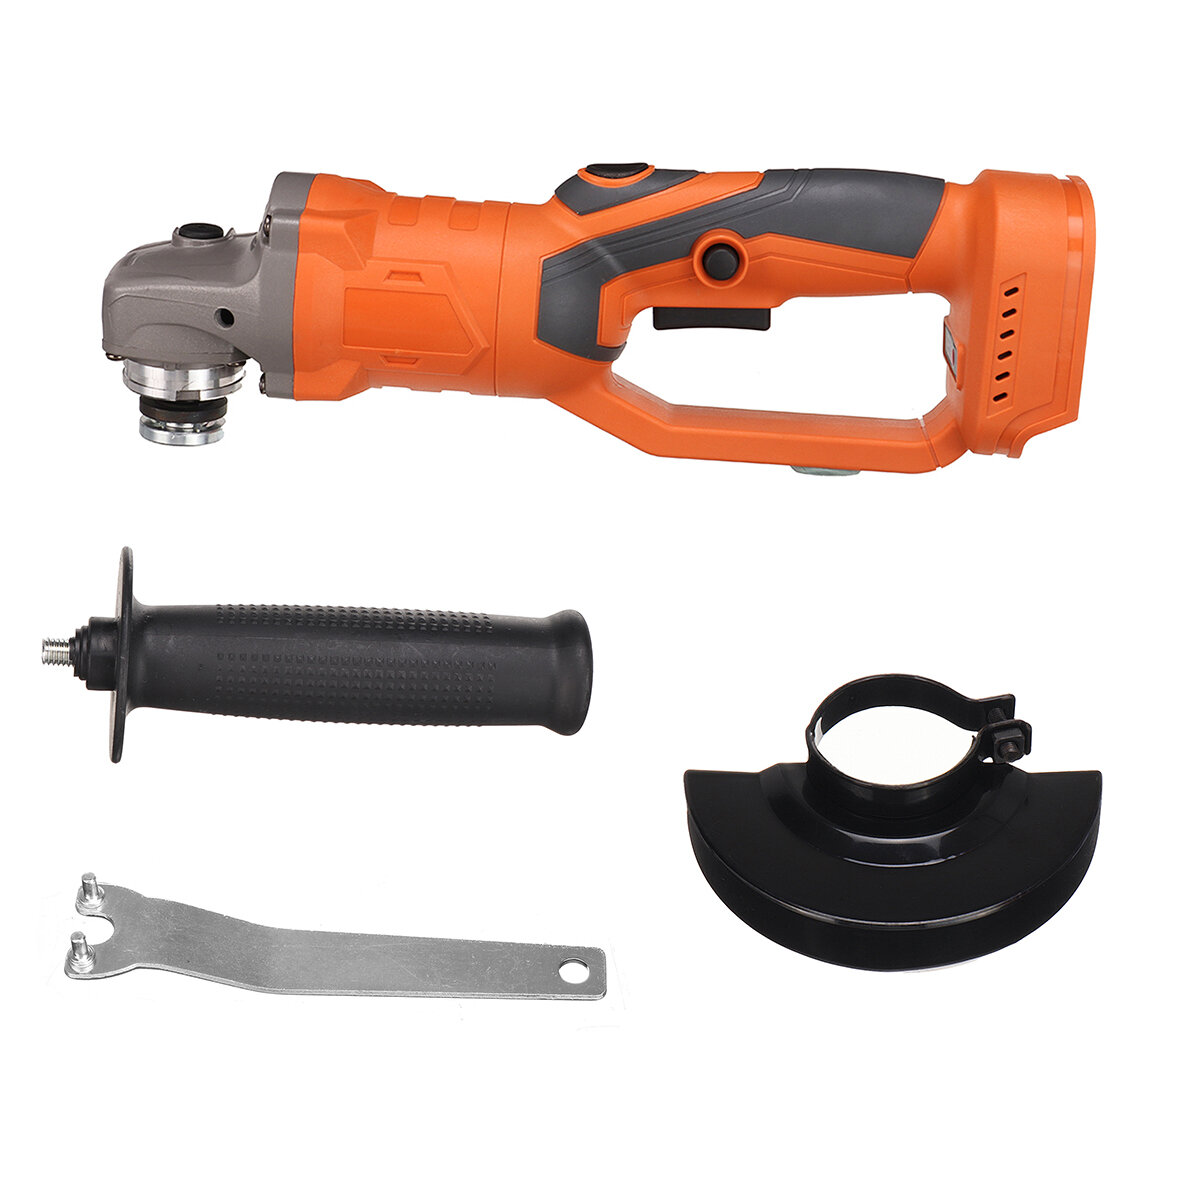 

180° Rotary Cordless Brushless Angle Grinder 100mm 1580W Electric Angle Grinding Machine W/ 3 LED Lights Fit Makita Batt